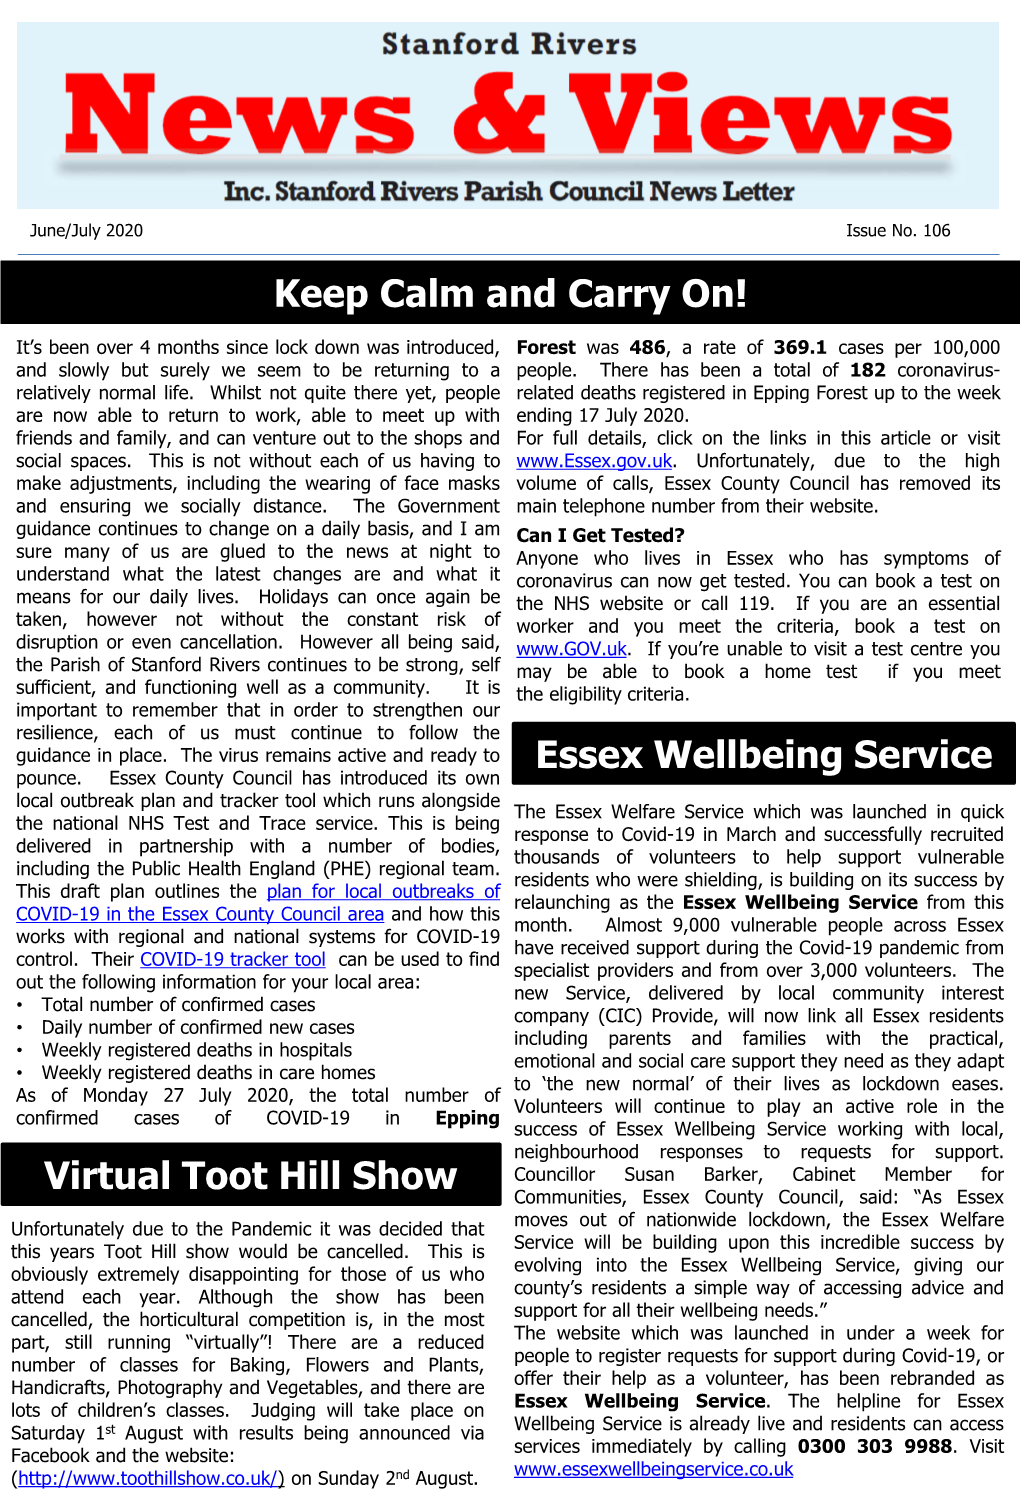 Keep Calm and Carry On! Virtual Toot Hill Show Essex Wellbeing Service